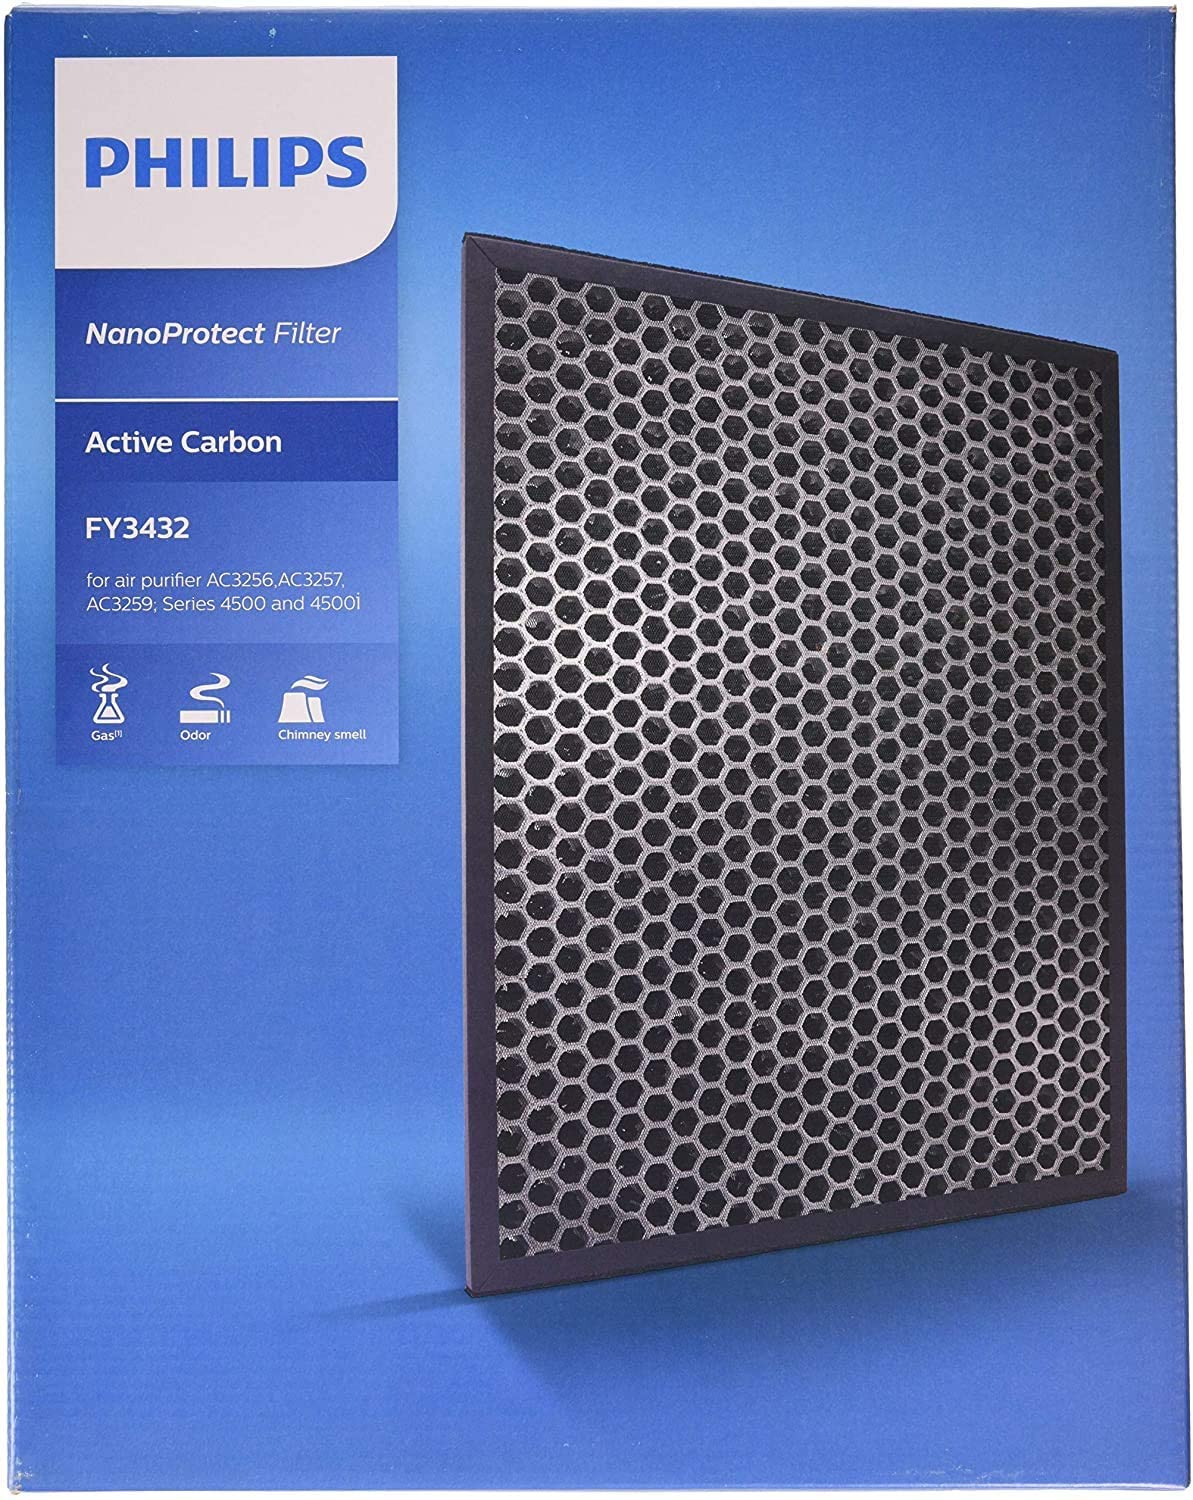 Philips FY3432 Nano Protect Filter, Black